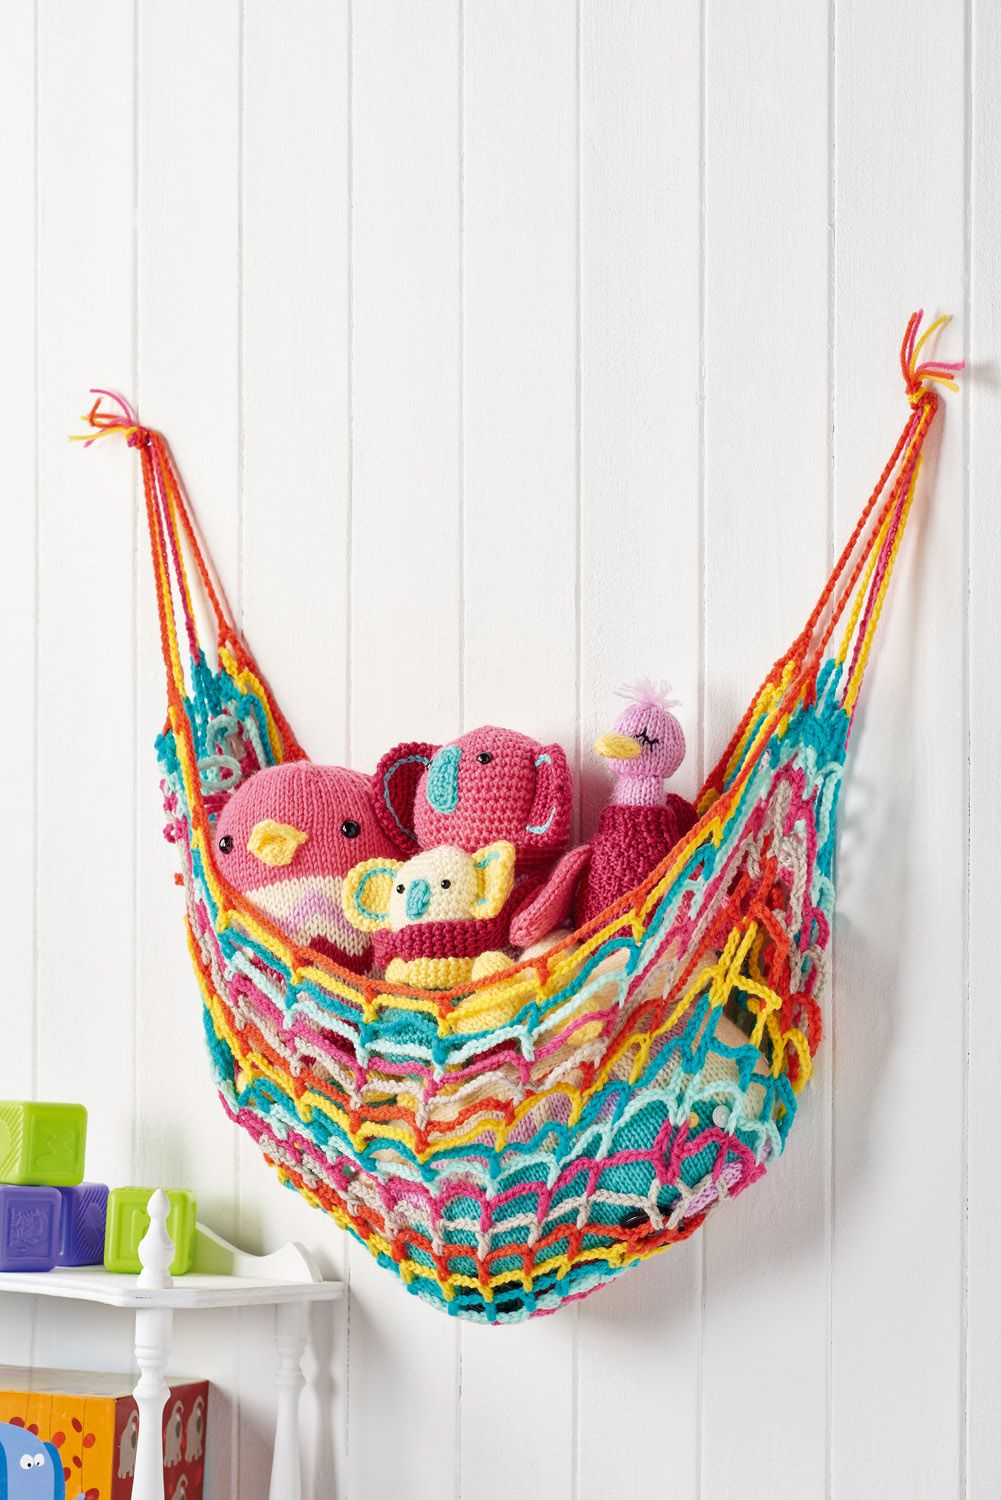 Crochet Toy Hammock Free Pattern Toy Hammock Lets Get Crafting Issue 91 Image Cliqqcouk